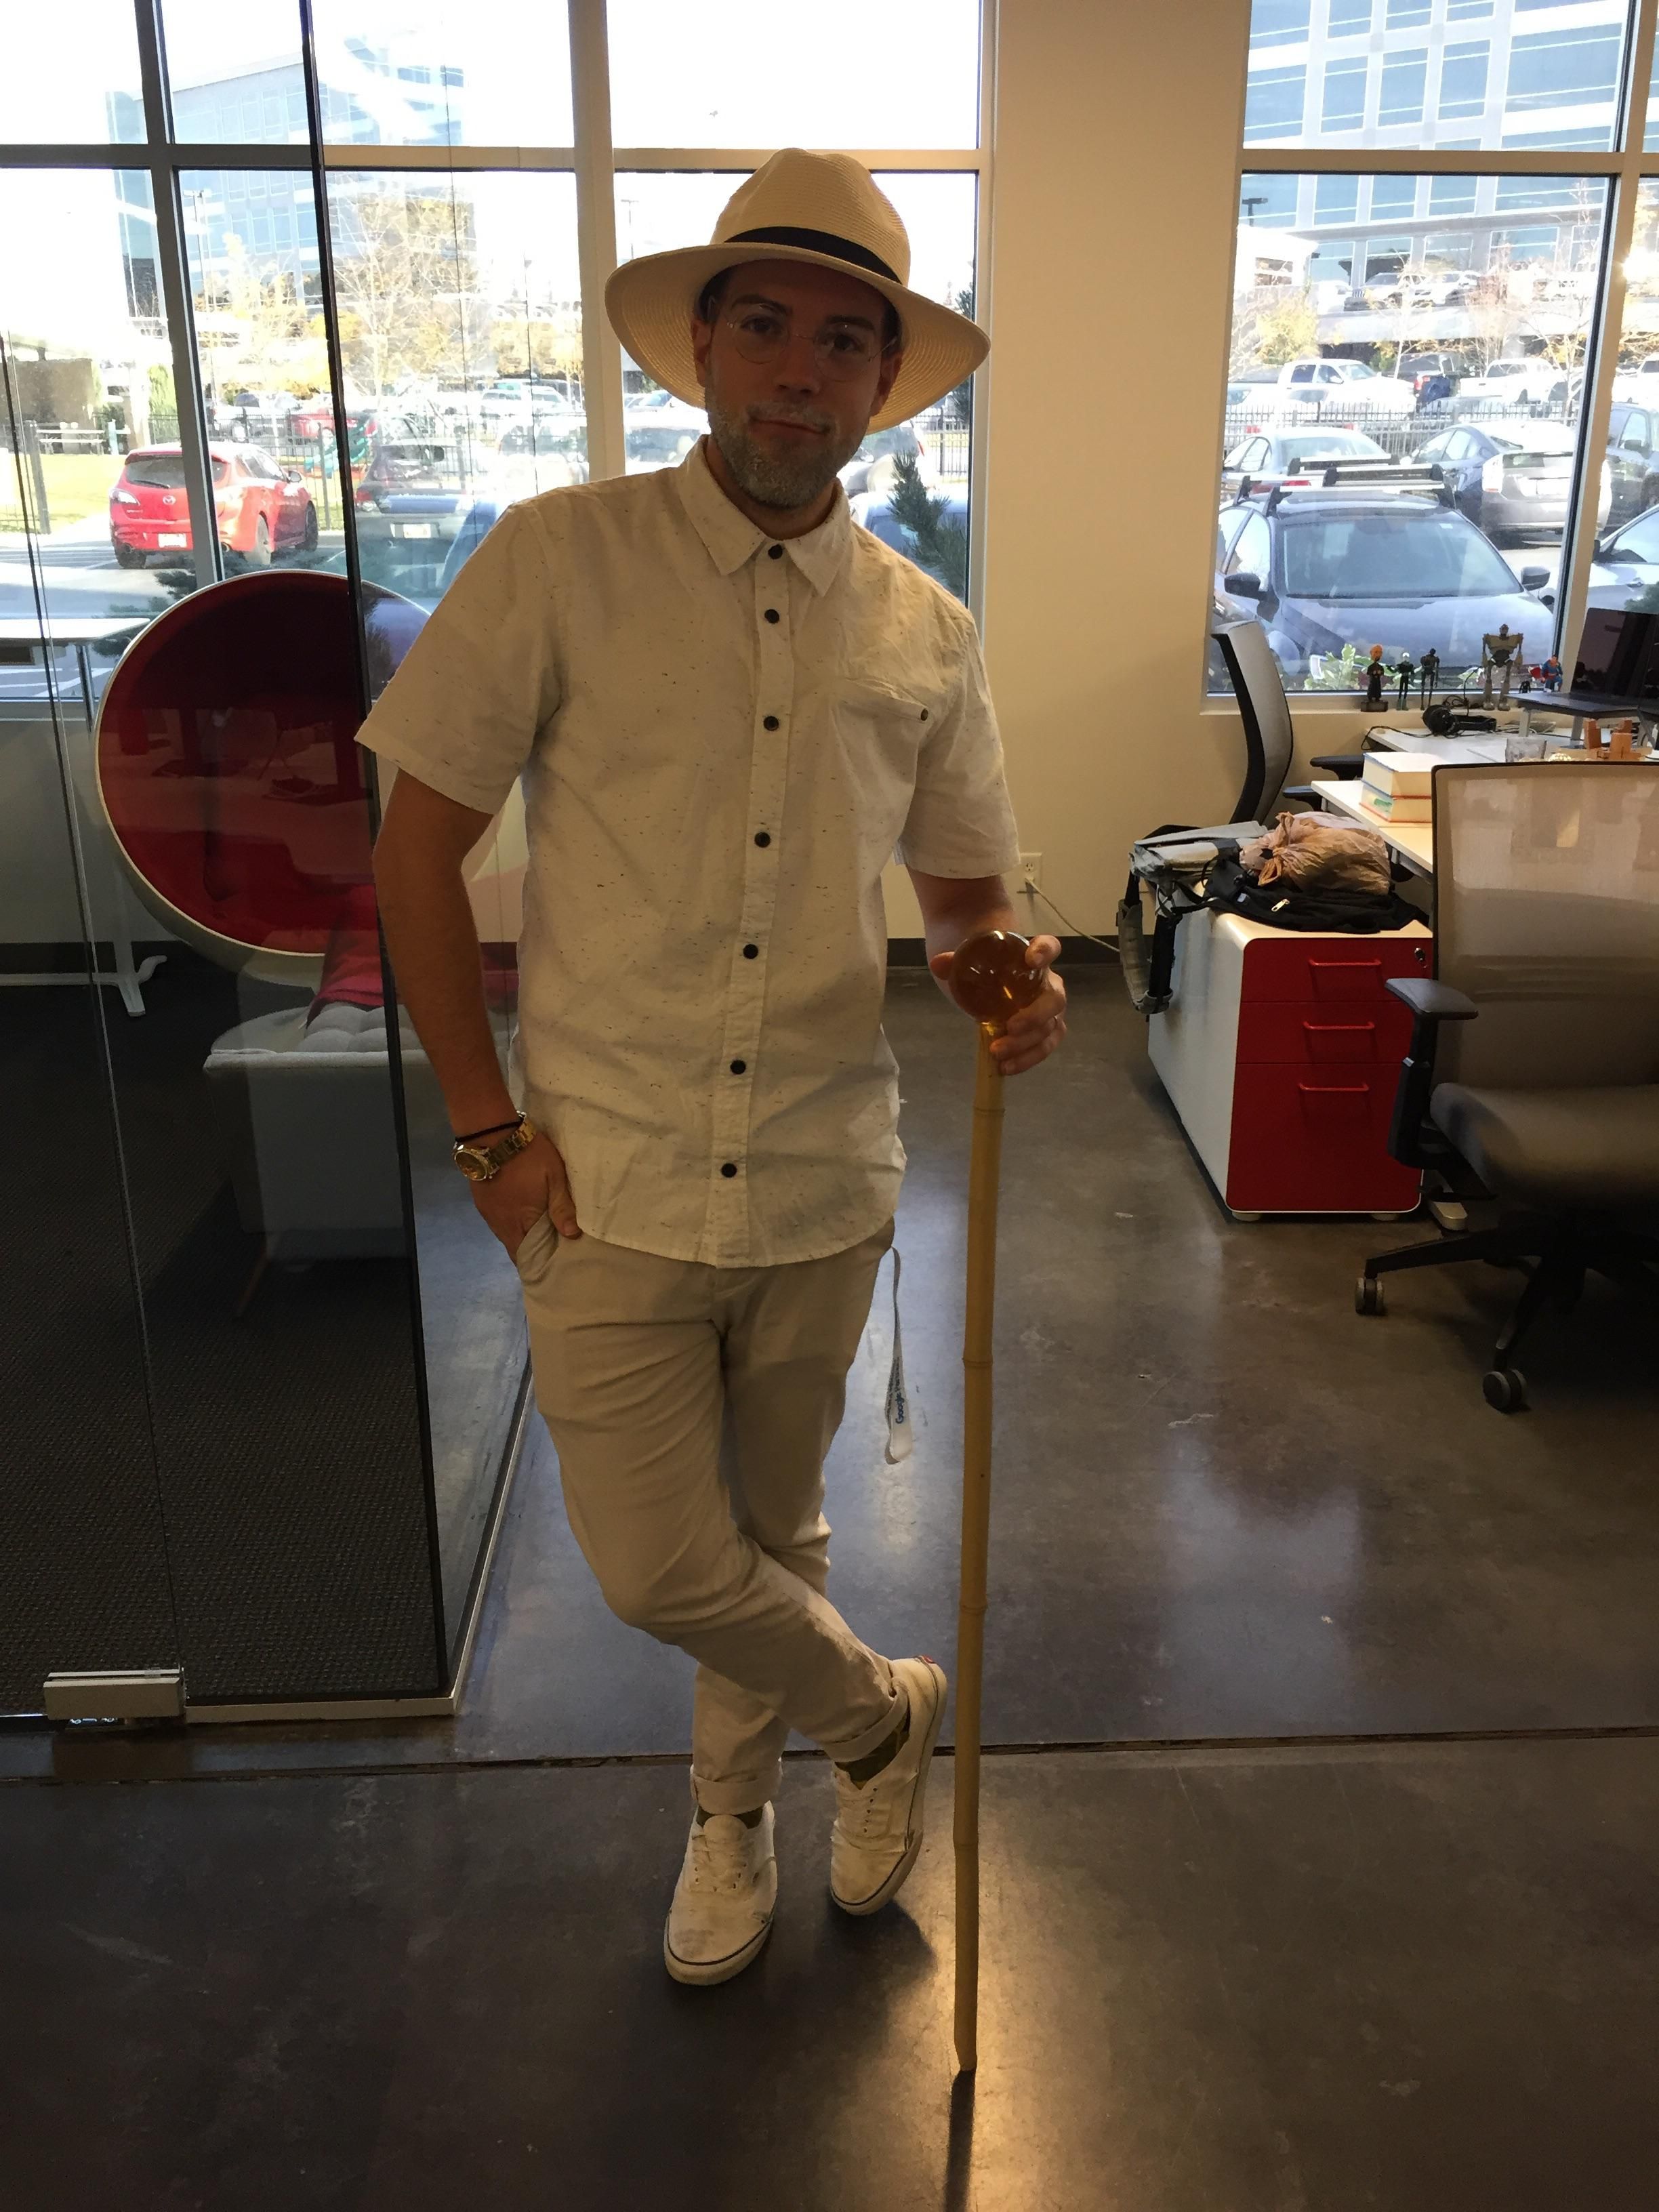 A coworker of mine is named Jon Hammond. He spared no expense on his Halloween costume.